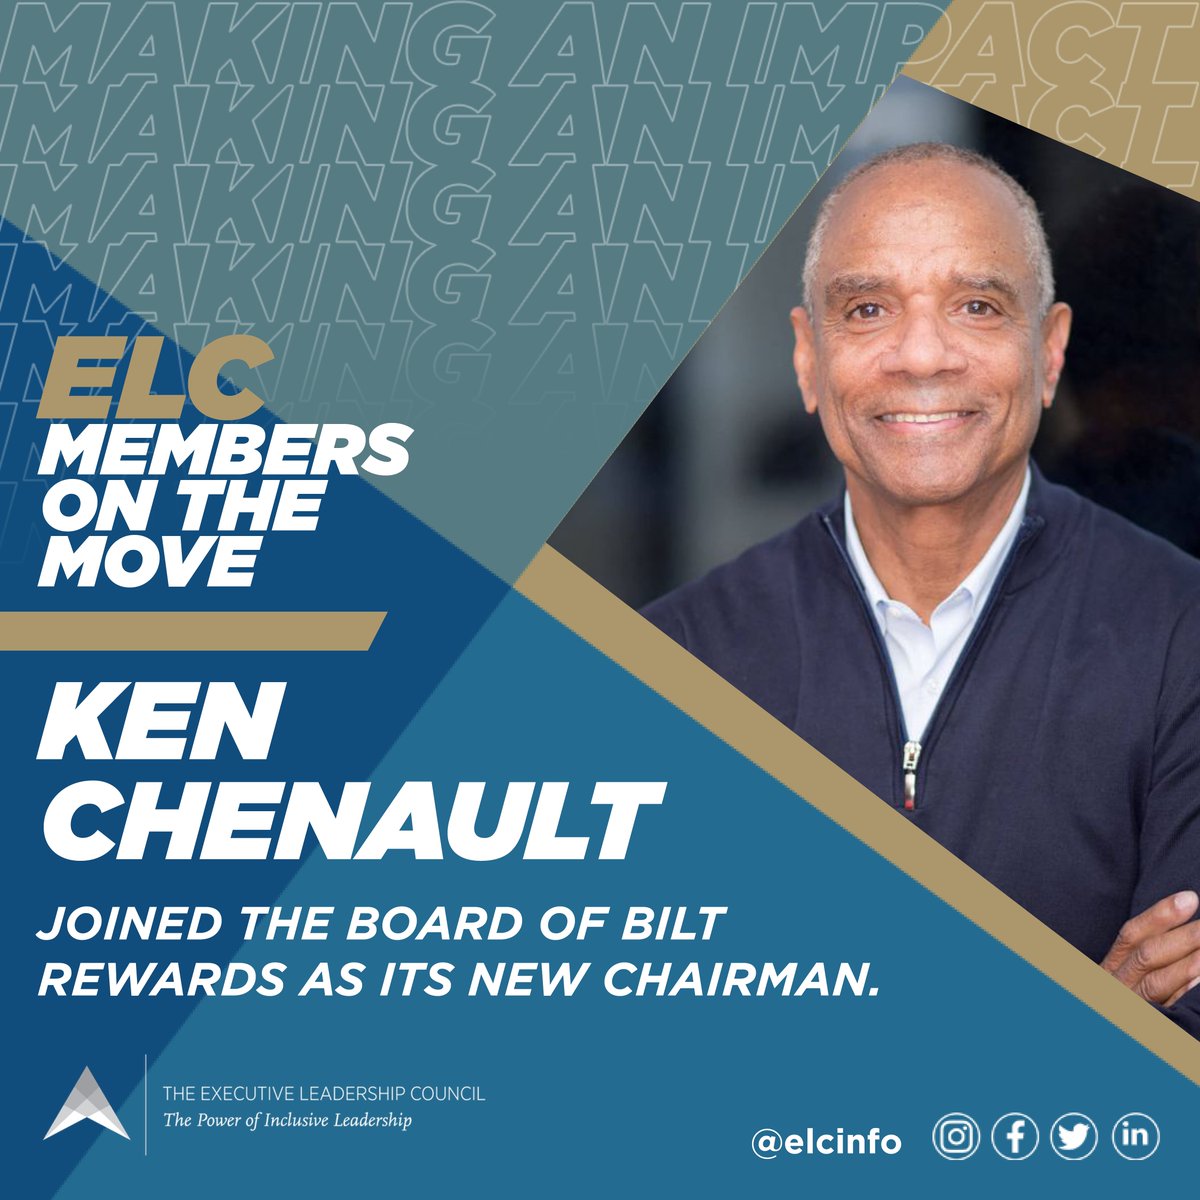 Congratulations to #ELCMember Ken Chenault, who joined the Board of Bilt Rewards as its new Chairman. 

#ELCMembersOnTheMove #BlackMenLead #BlackExecutives #BlackLeadership